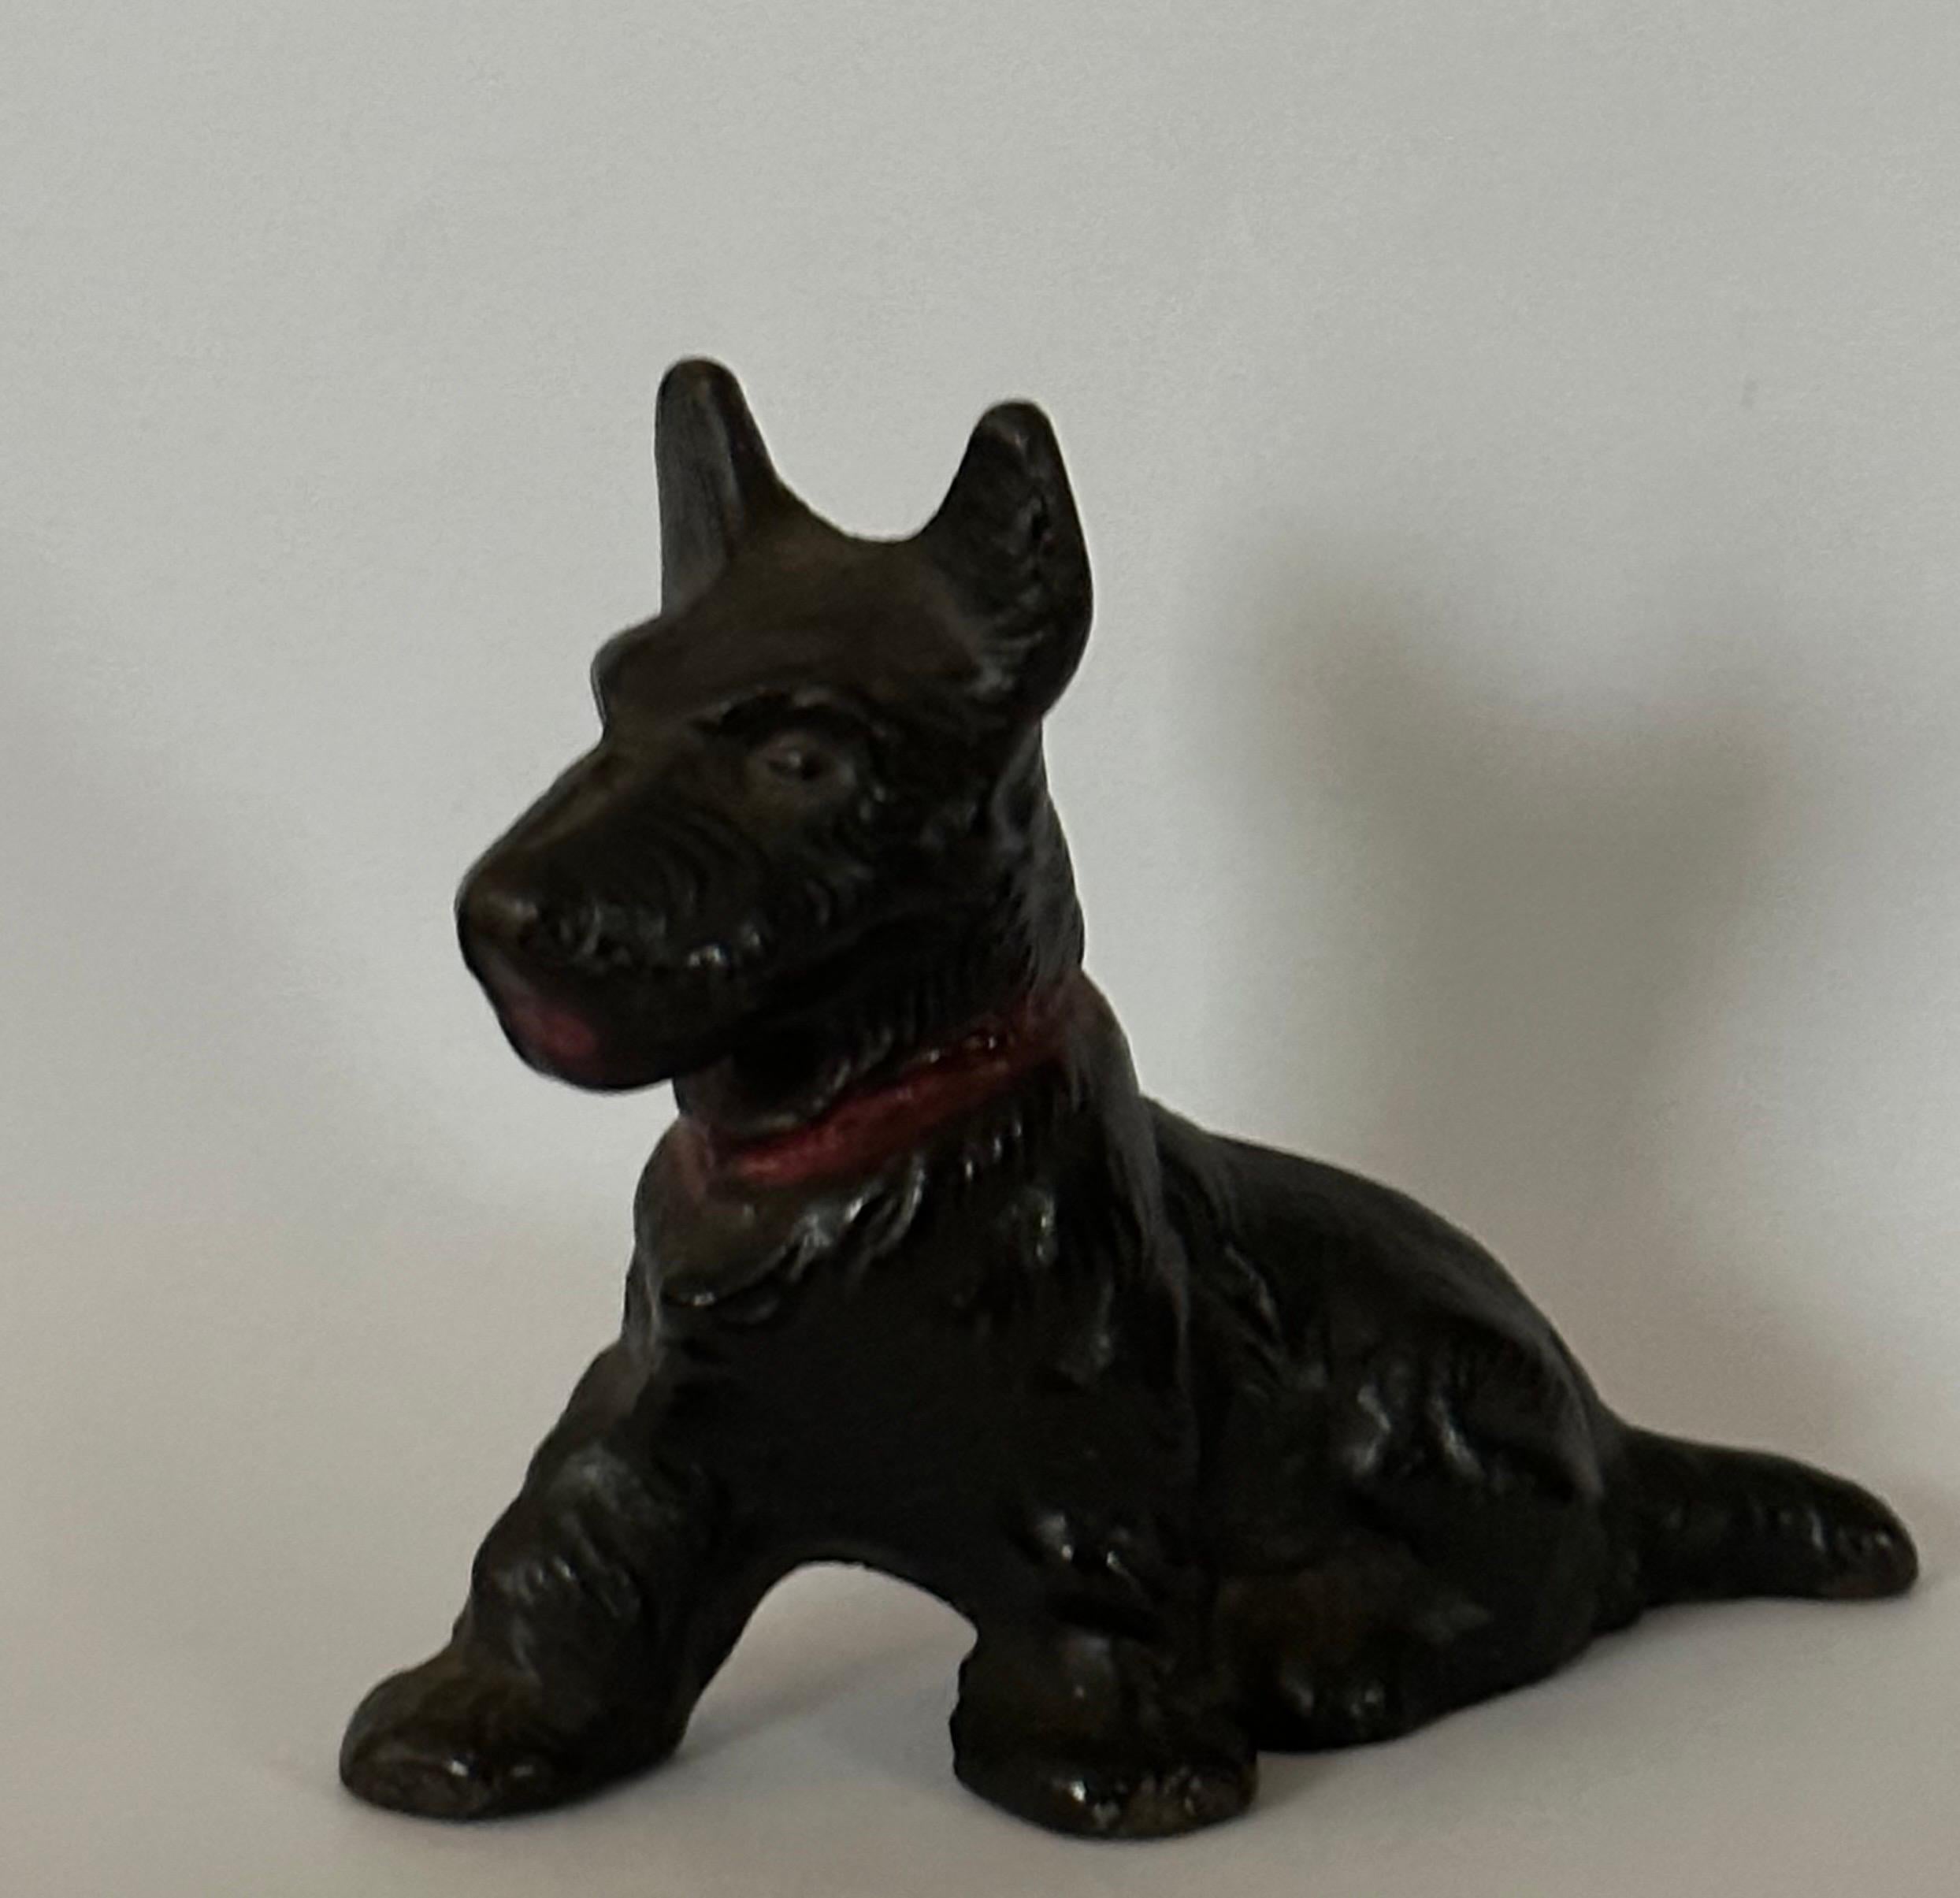 A wonderful vintage Scottie dog cast iron paperweight, circa 1940s. The piece is in very good vintage condition and measures 3.75